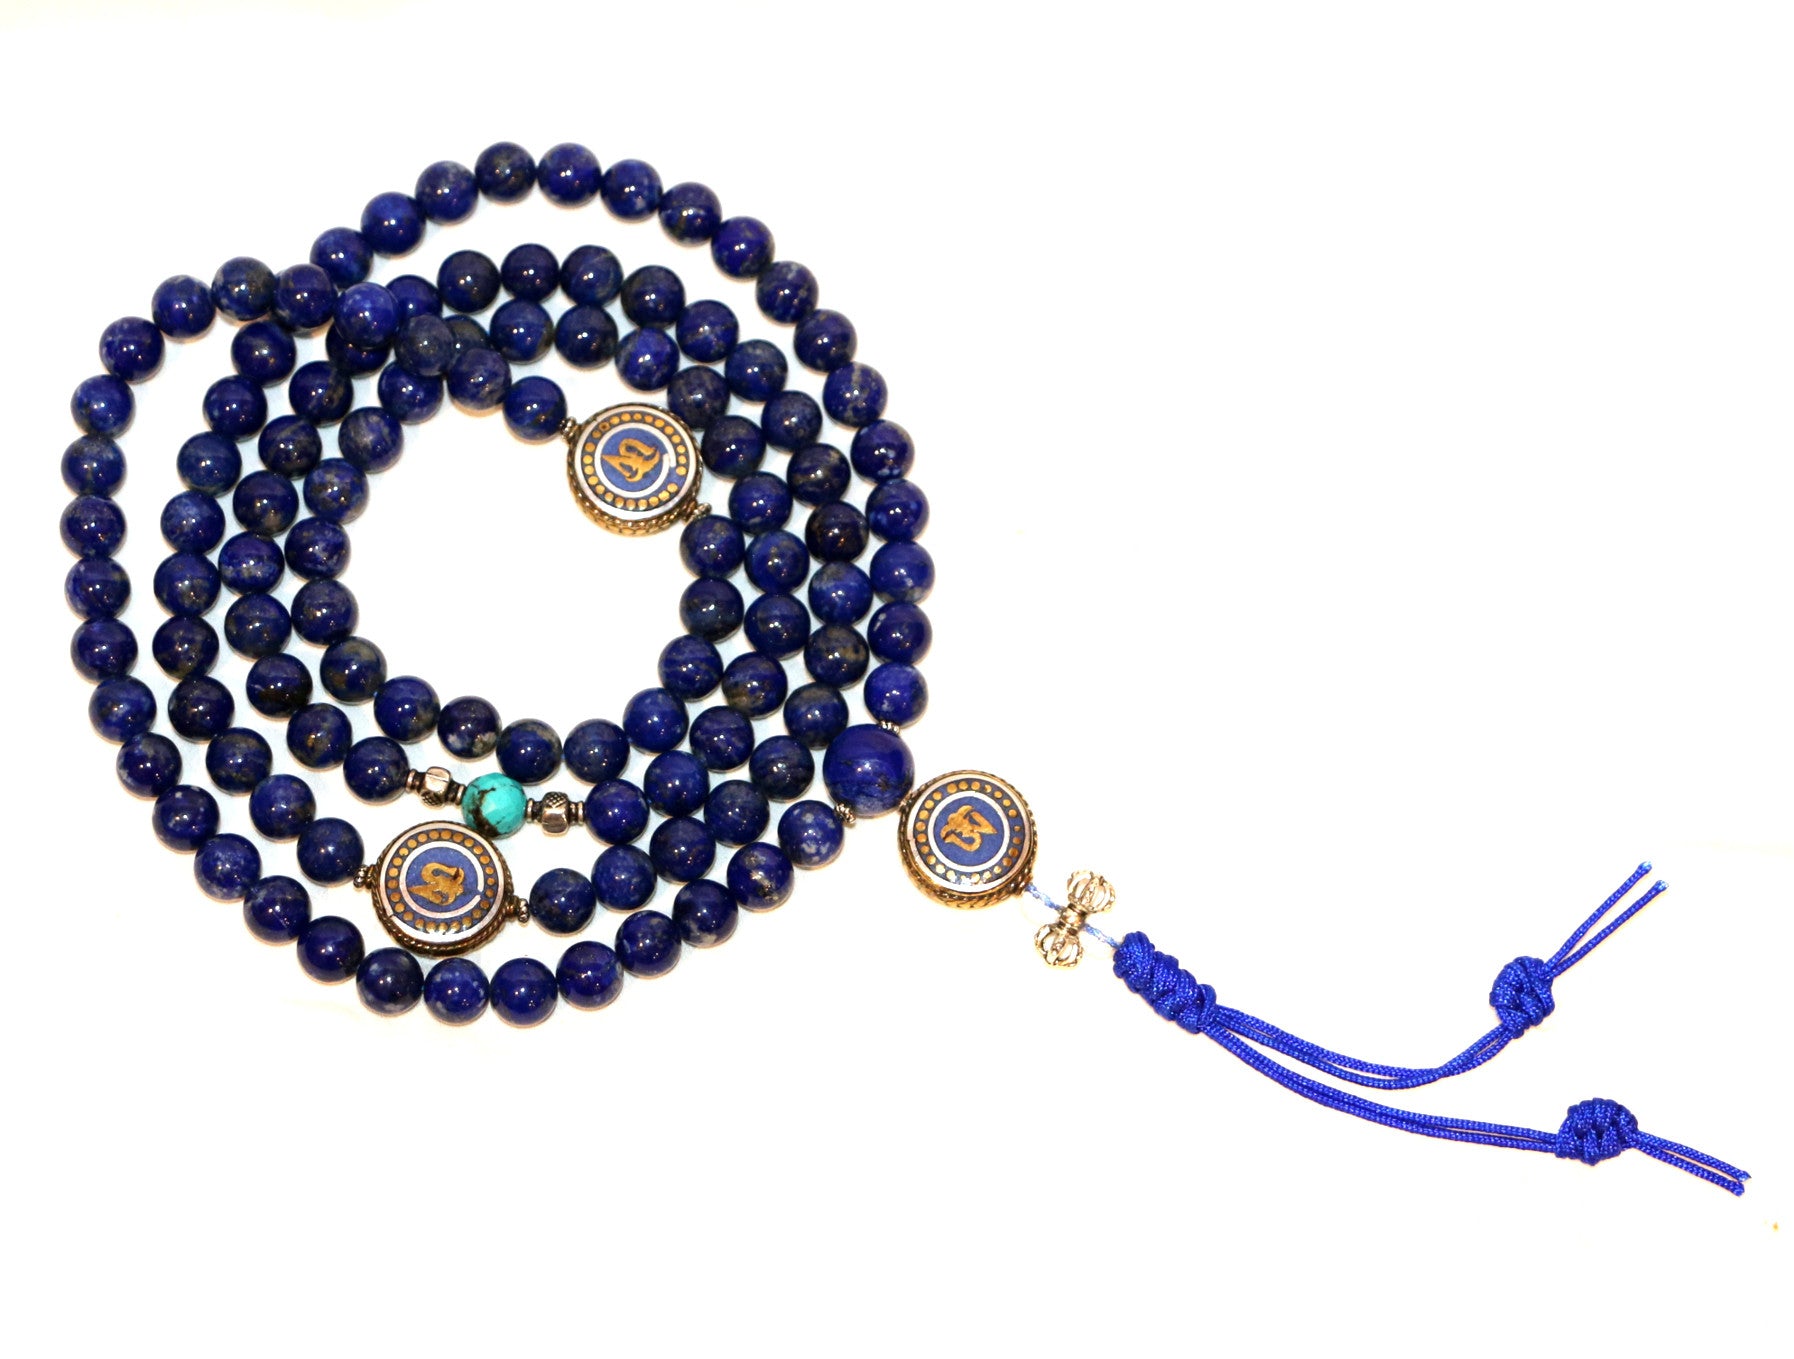 Special Lapis Necklace Mala with OM - Tibet Arts & Healing